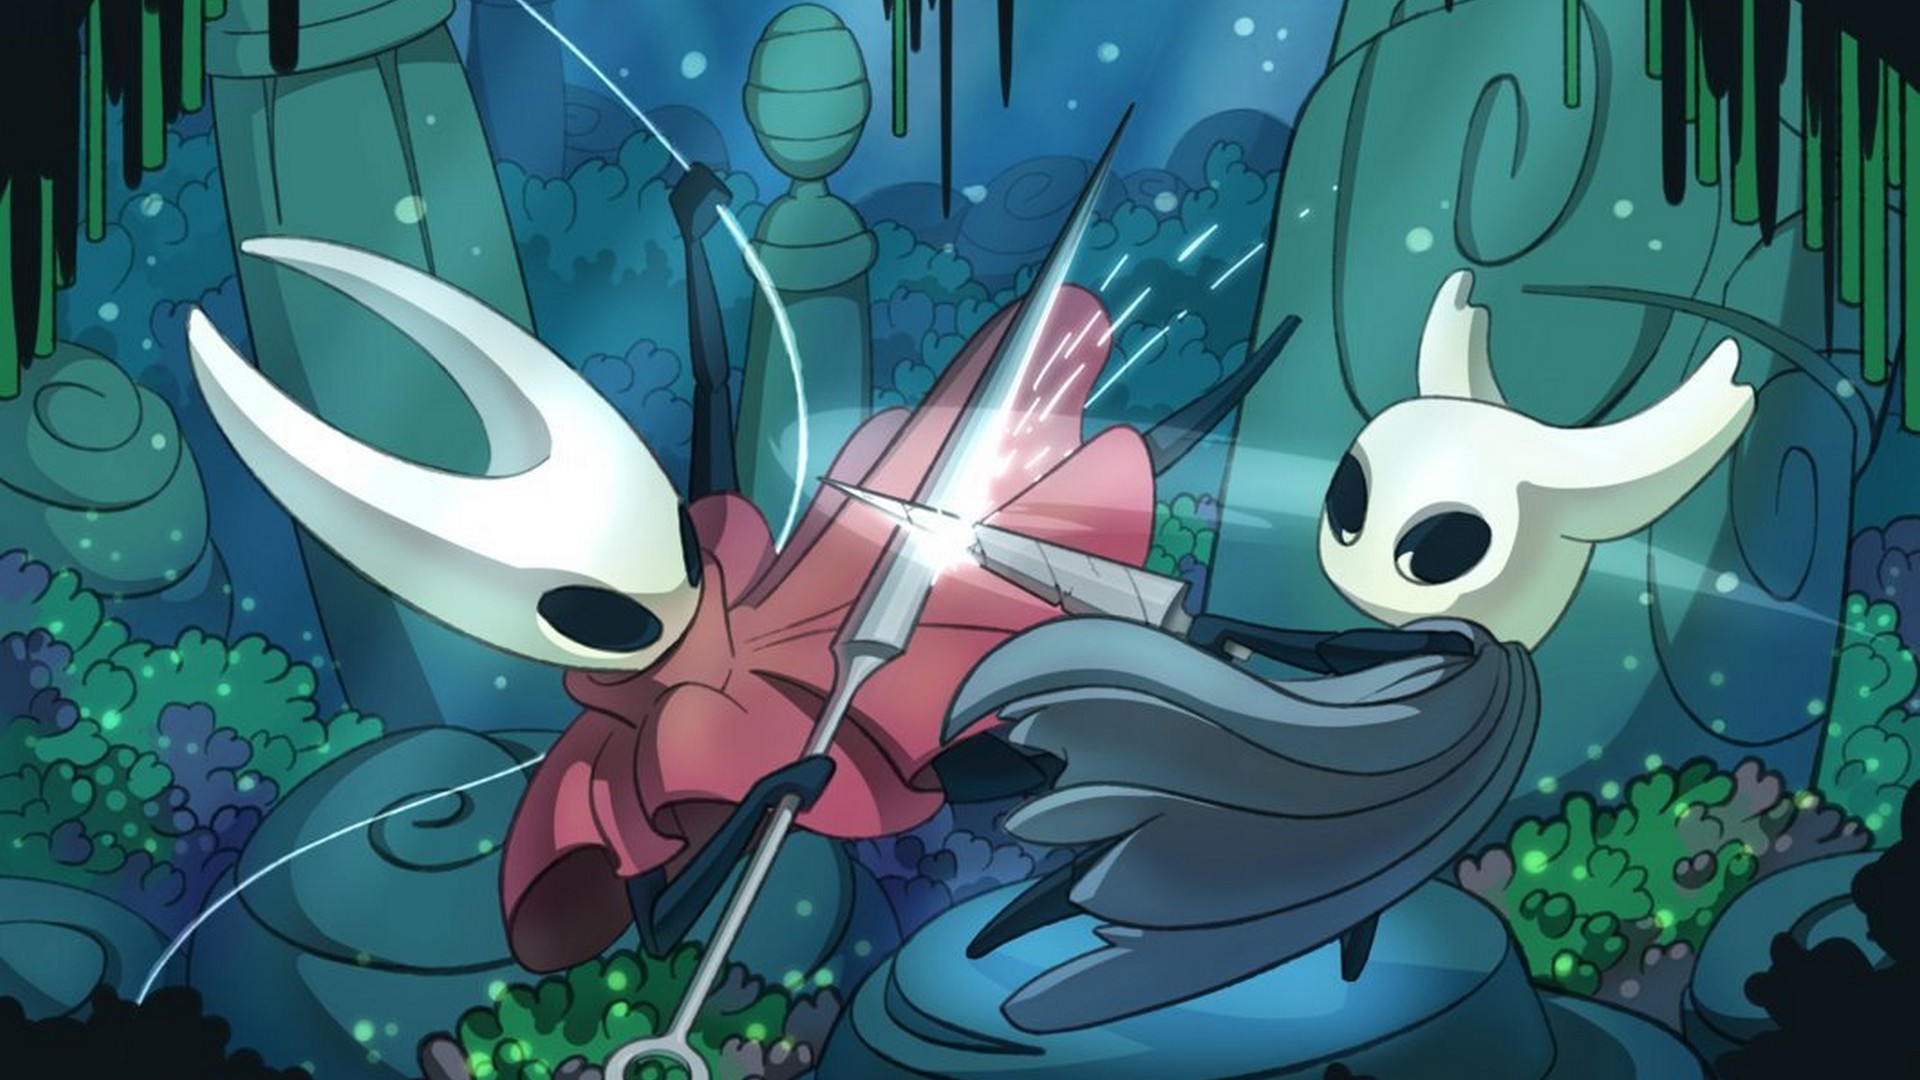 download new hollow knight game